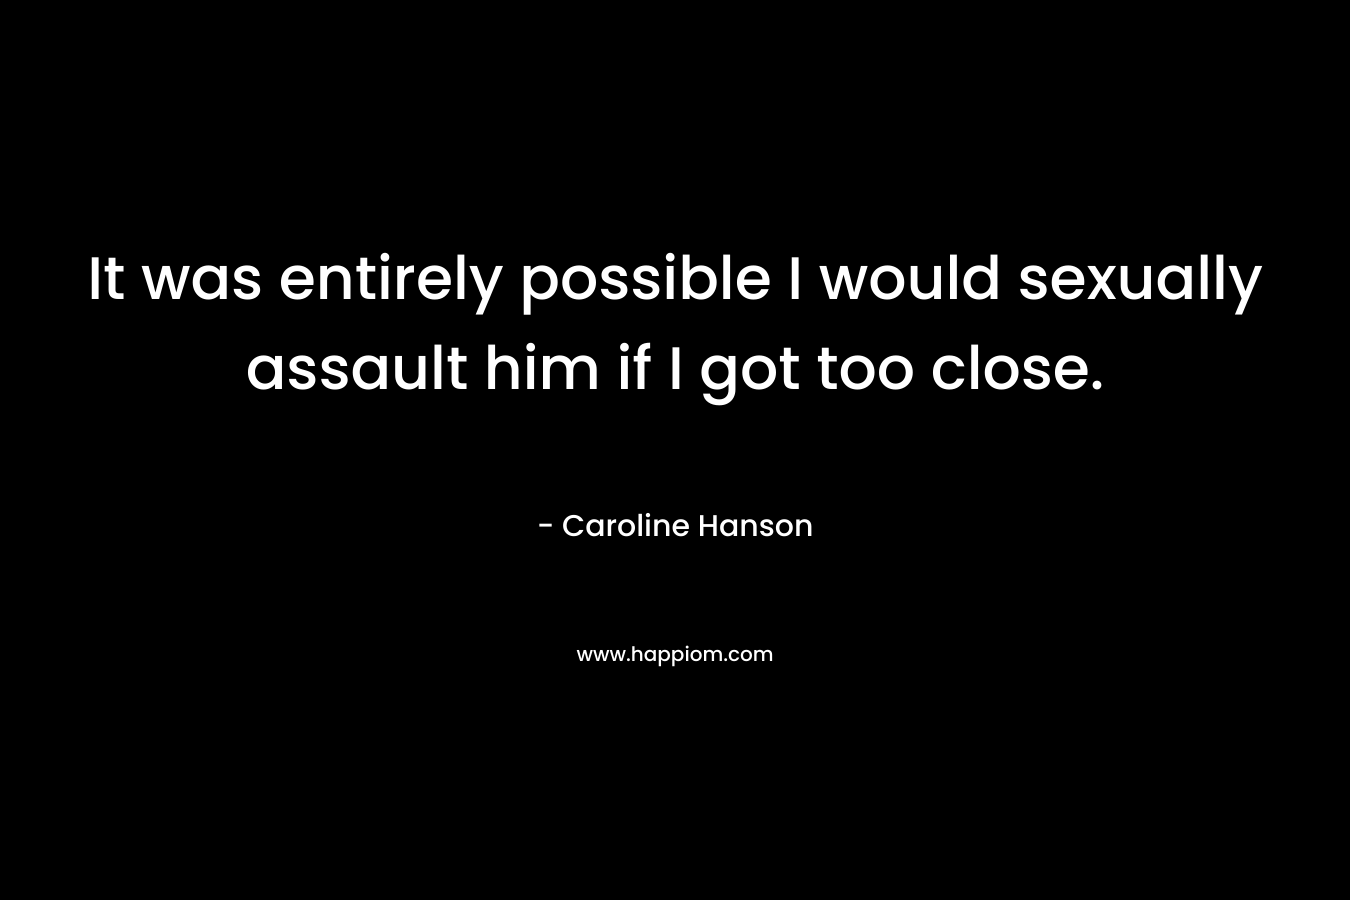 It was entirely possible I would sexually assault him if I got too close.